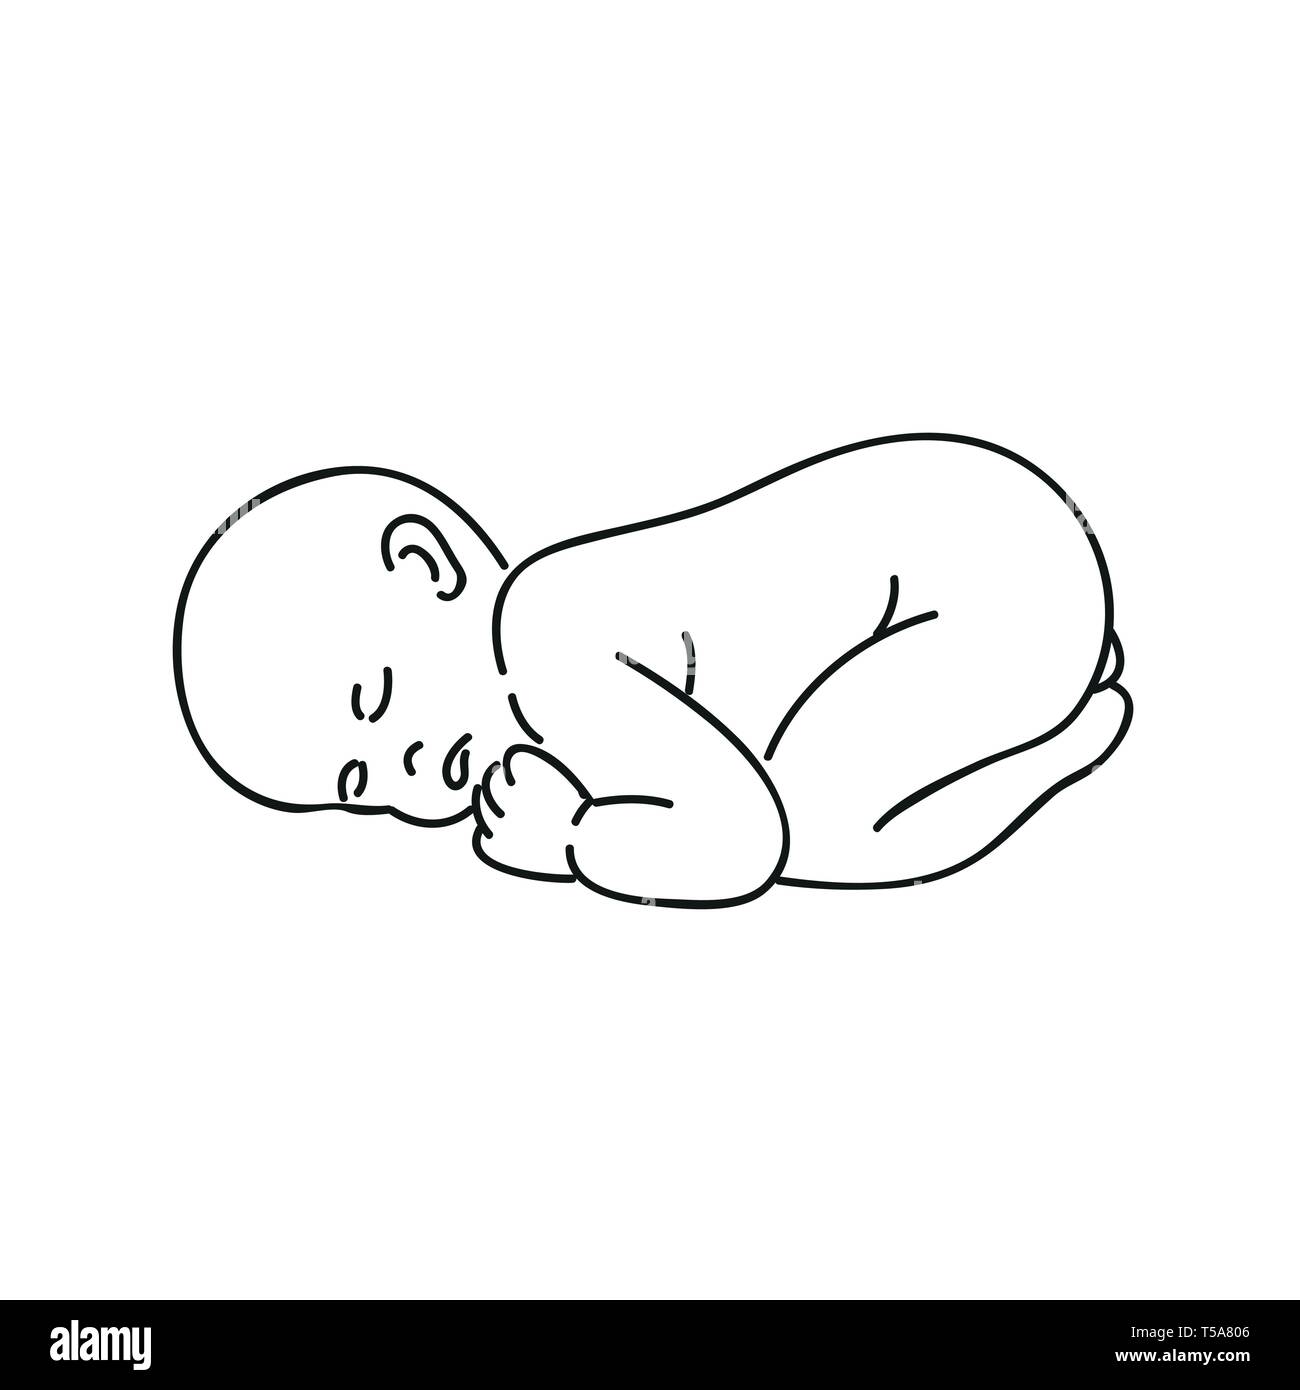 Lovely Newborn Sleeping In The Crib Cute Sleeping Child Sketch Hand  Drawn Royalty Free SVG Cliparts Vectors And Stock Illustration Image  48176036